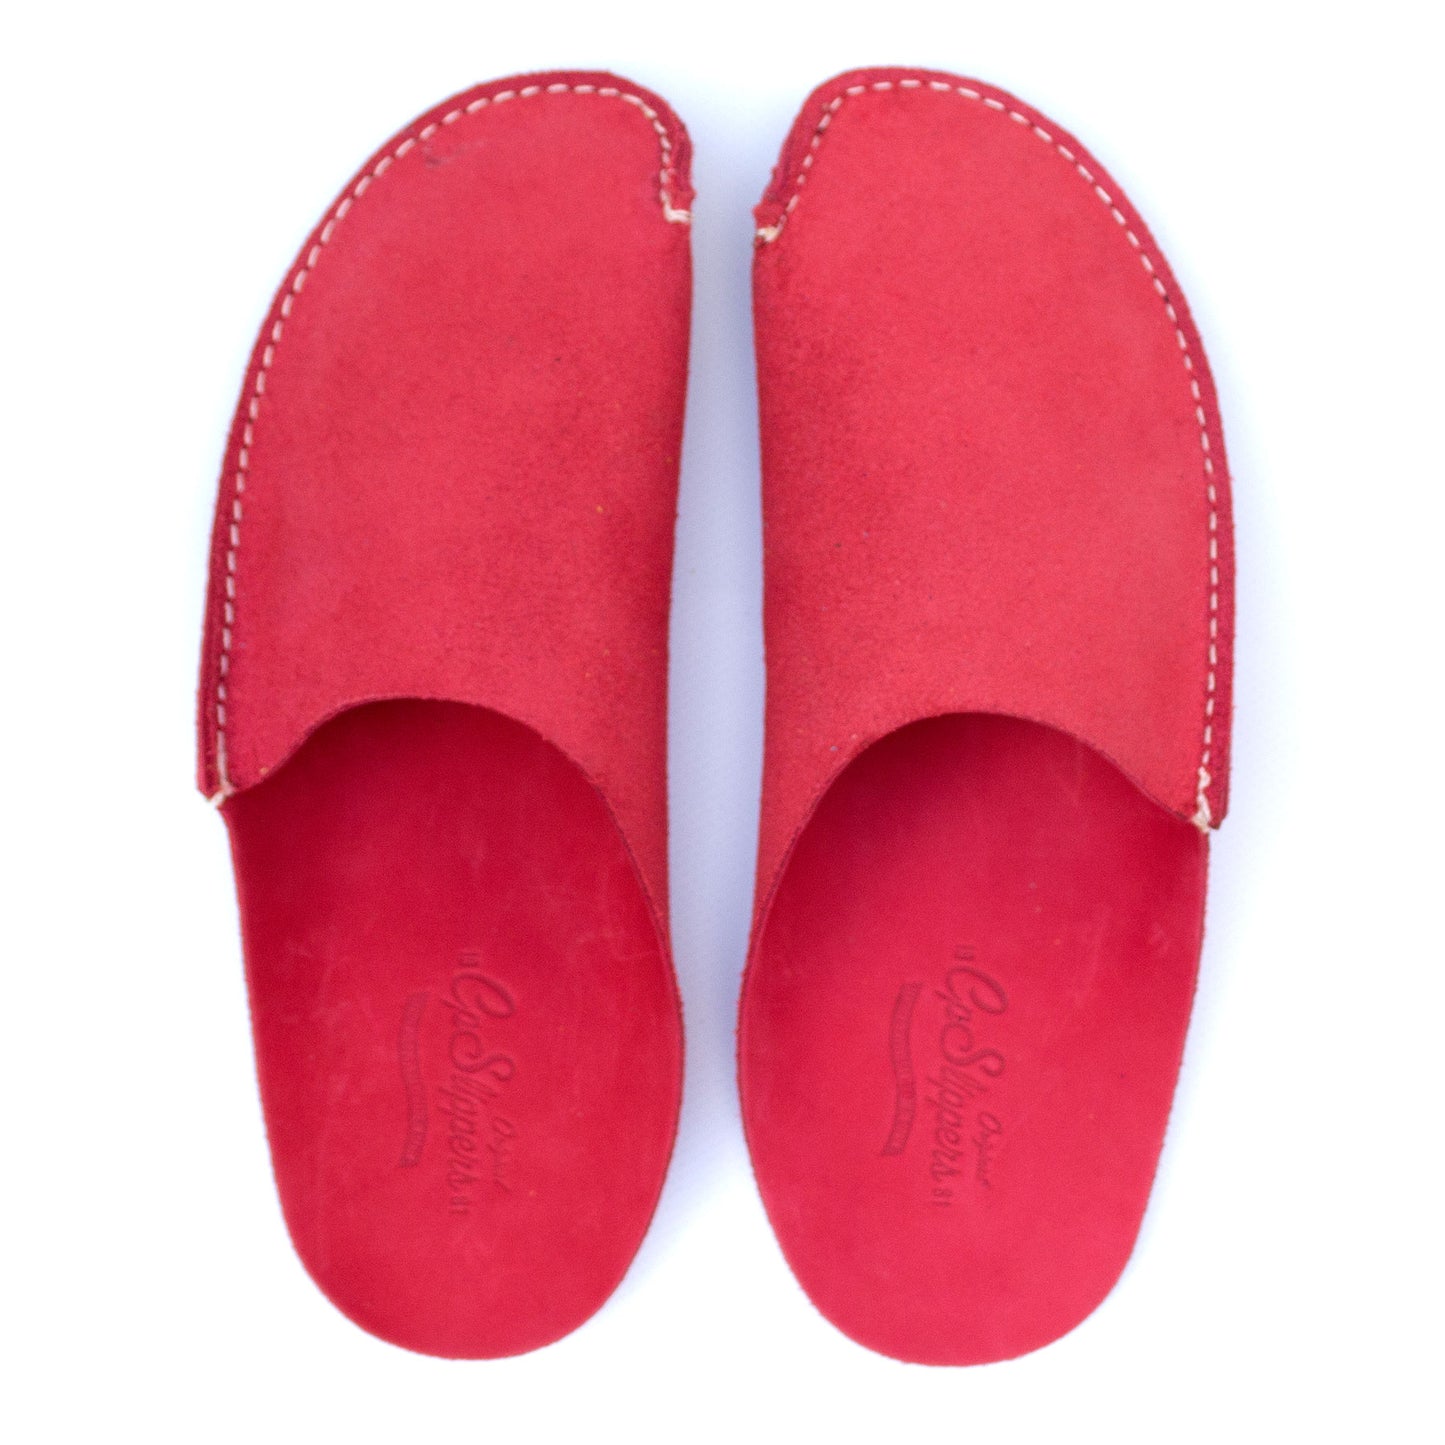 Red CP Slippers minimalist home shoes for man and woman